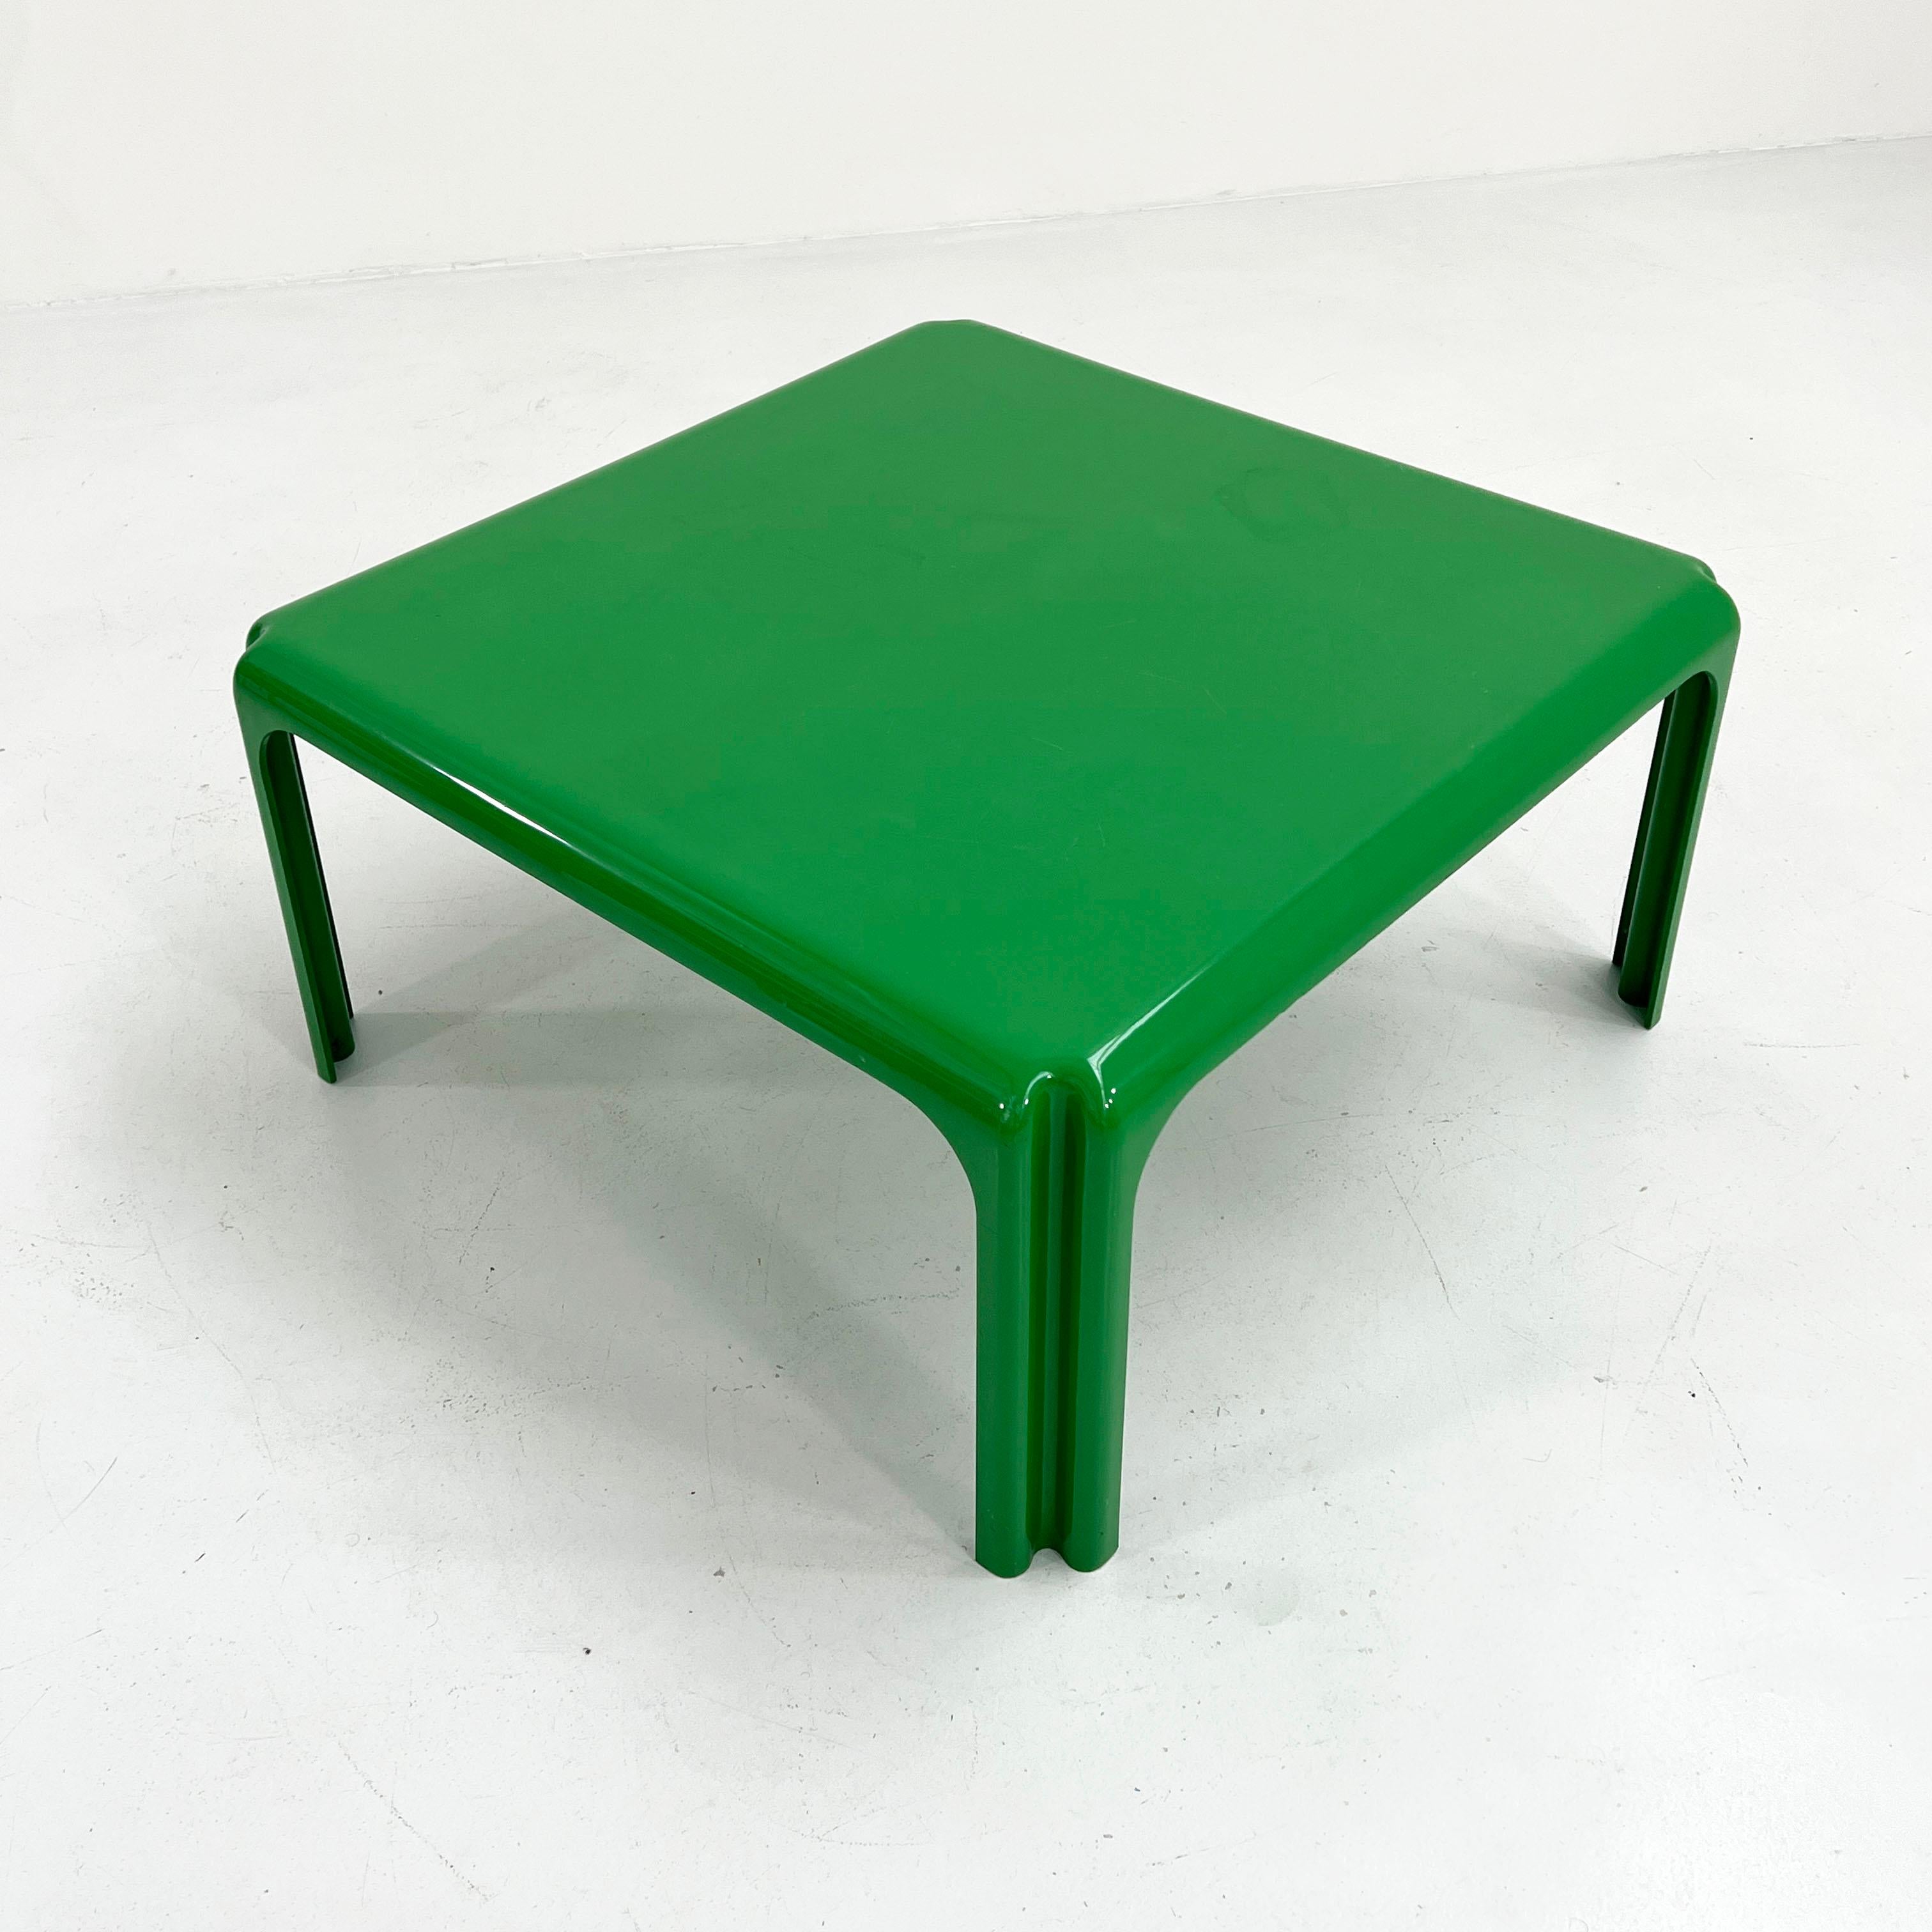 Designer - Vico Magistretti
Producer - Artemide
Model - Arcadia 80 Coffee Table 
Design Period - Seventies
Measurements - Width 80 cm x Depth 80 cm x Height 40 cm
Materials - Plastic
Color - Green
Light wear consistent with age and use. Some